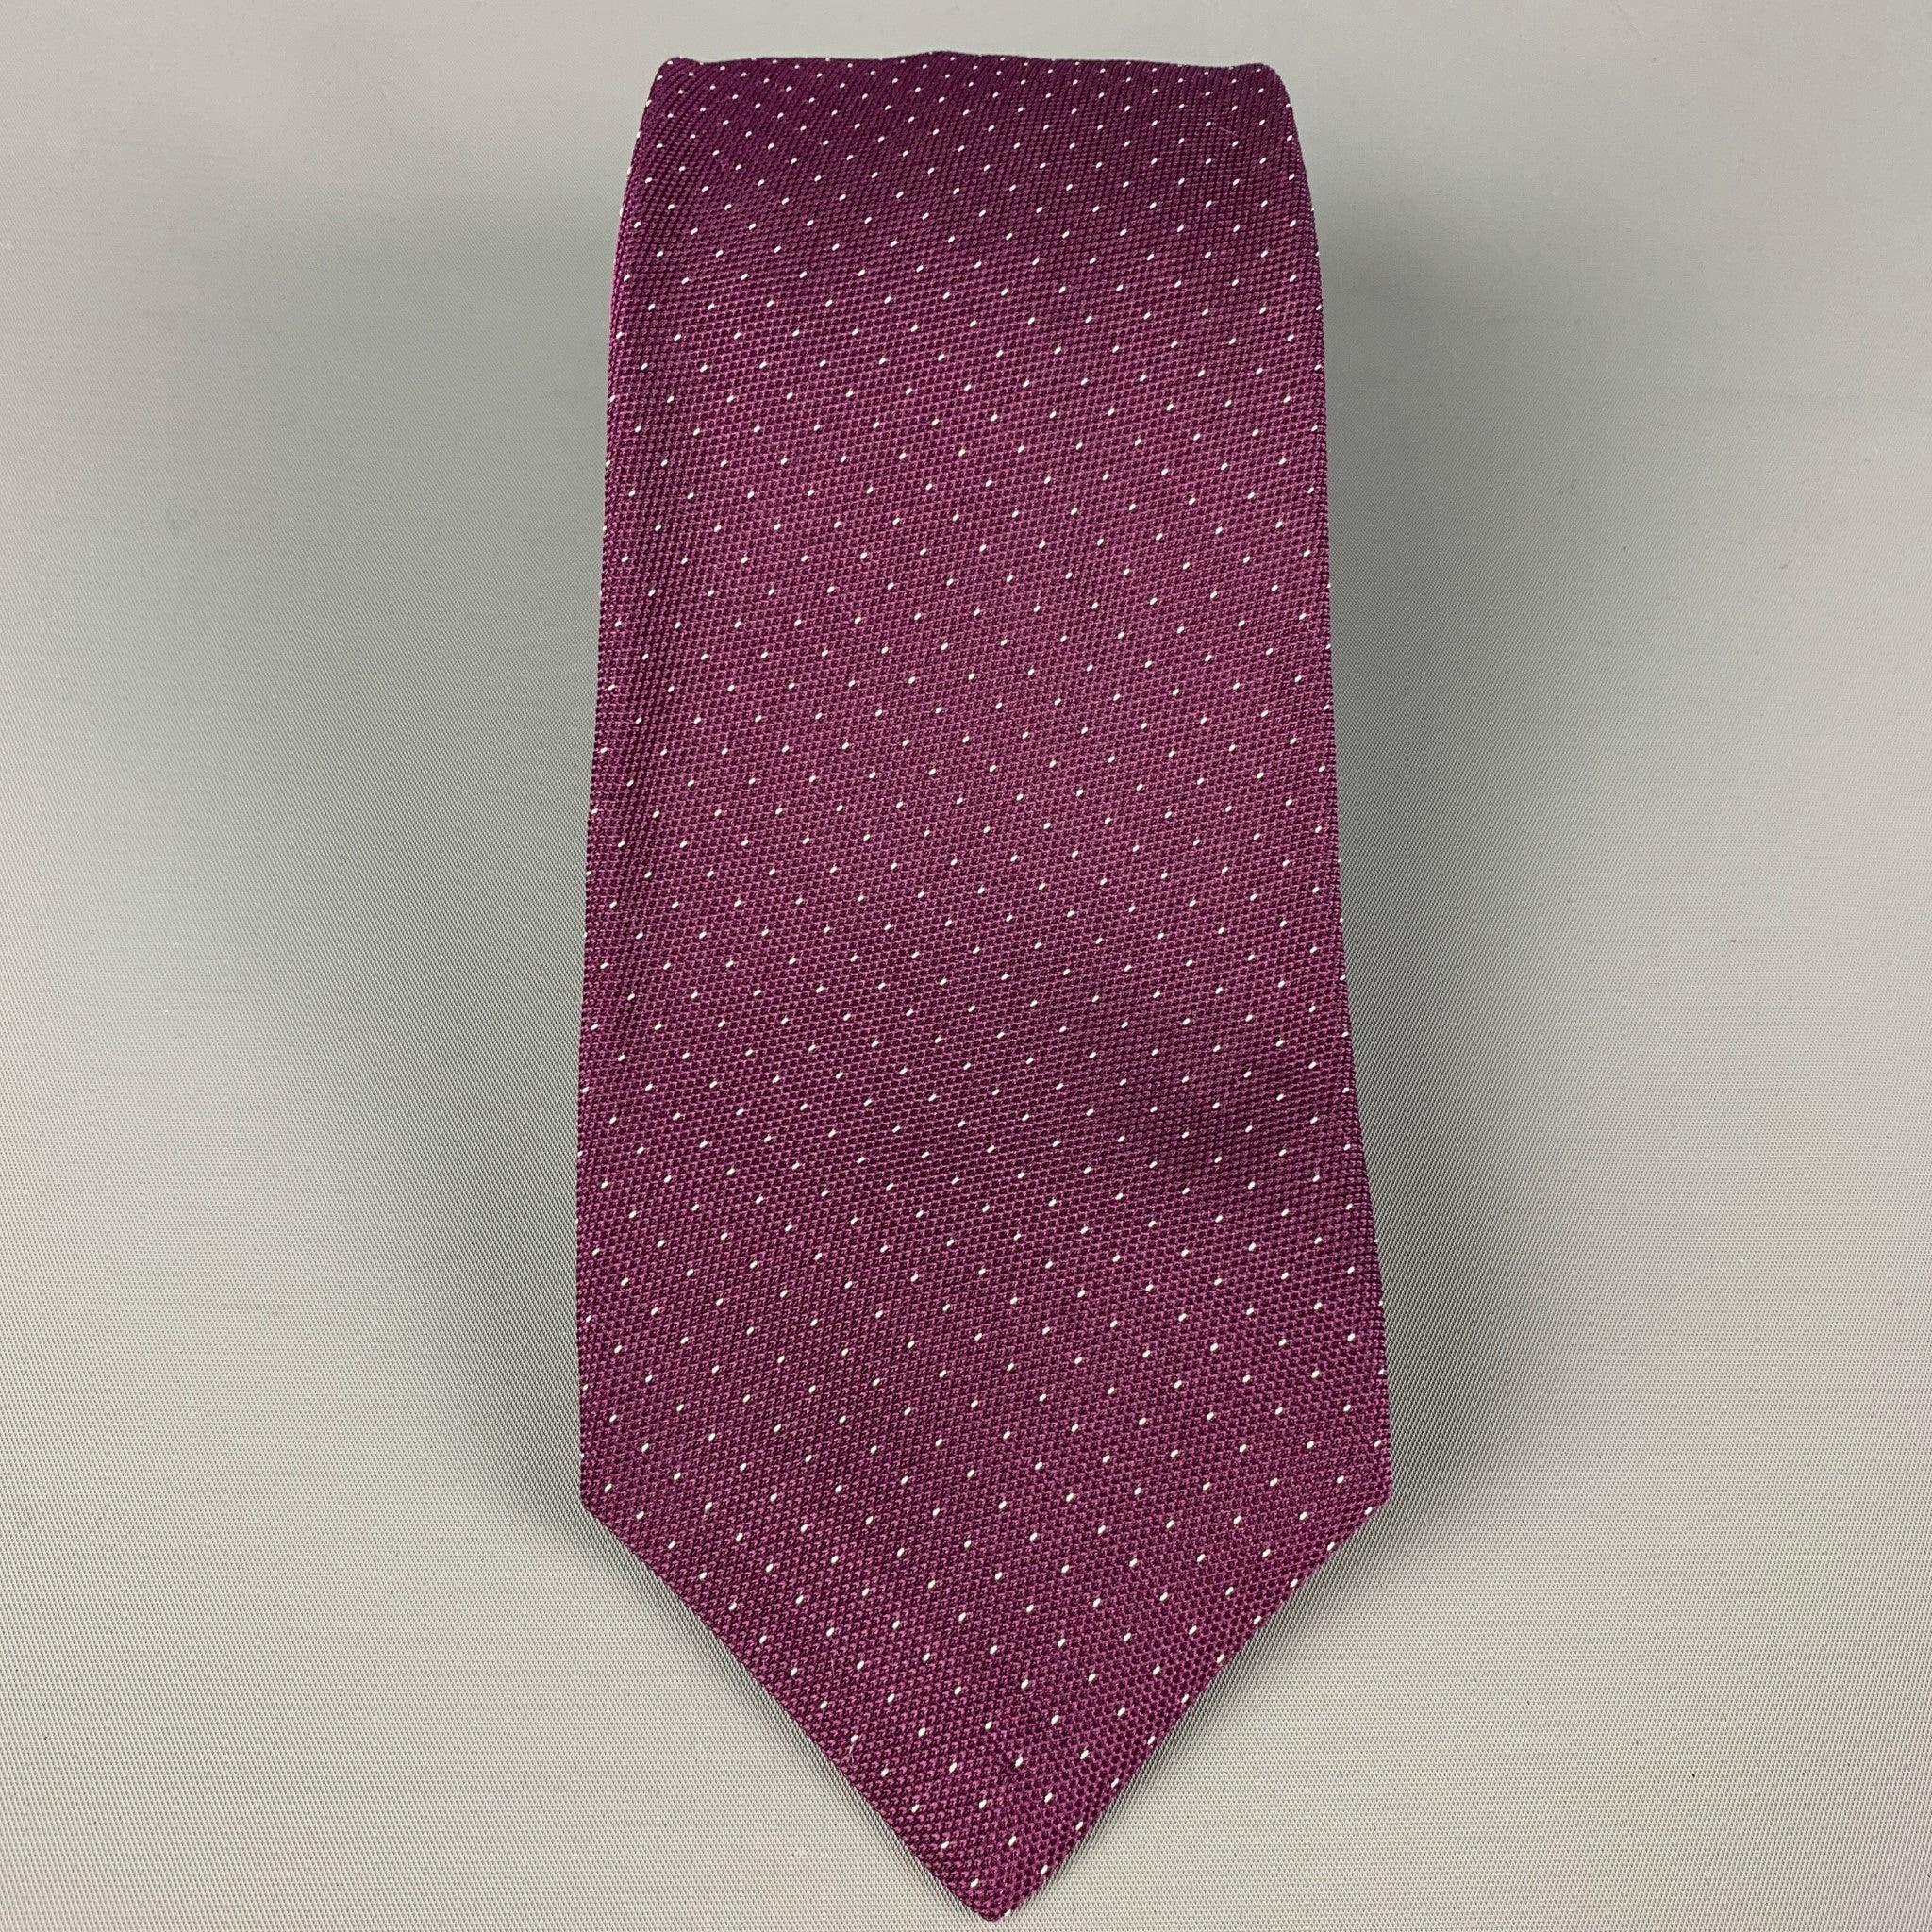 KITON necktie comes in a burgundy & white silk with a all over dot print. Made in Italy . Very Good Pre-Owned Condition.Width: 3.5 inches  Length: 59 inches 

  
  
 
Reference: 120366
Category: Tie
More Details
    
Brand:  KITON
Gender: 